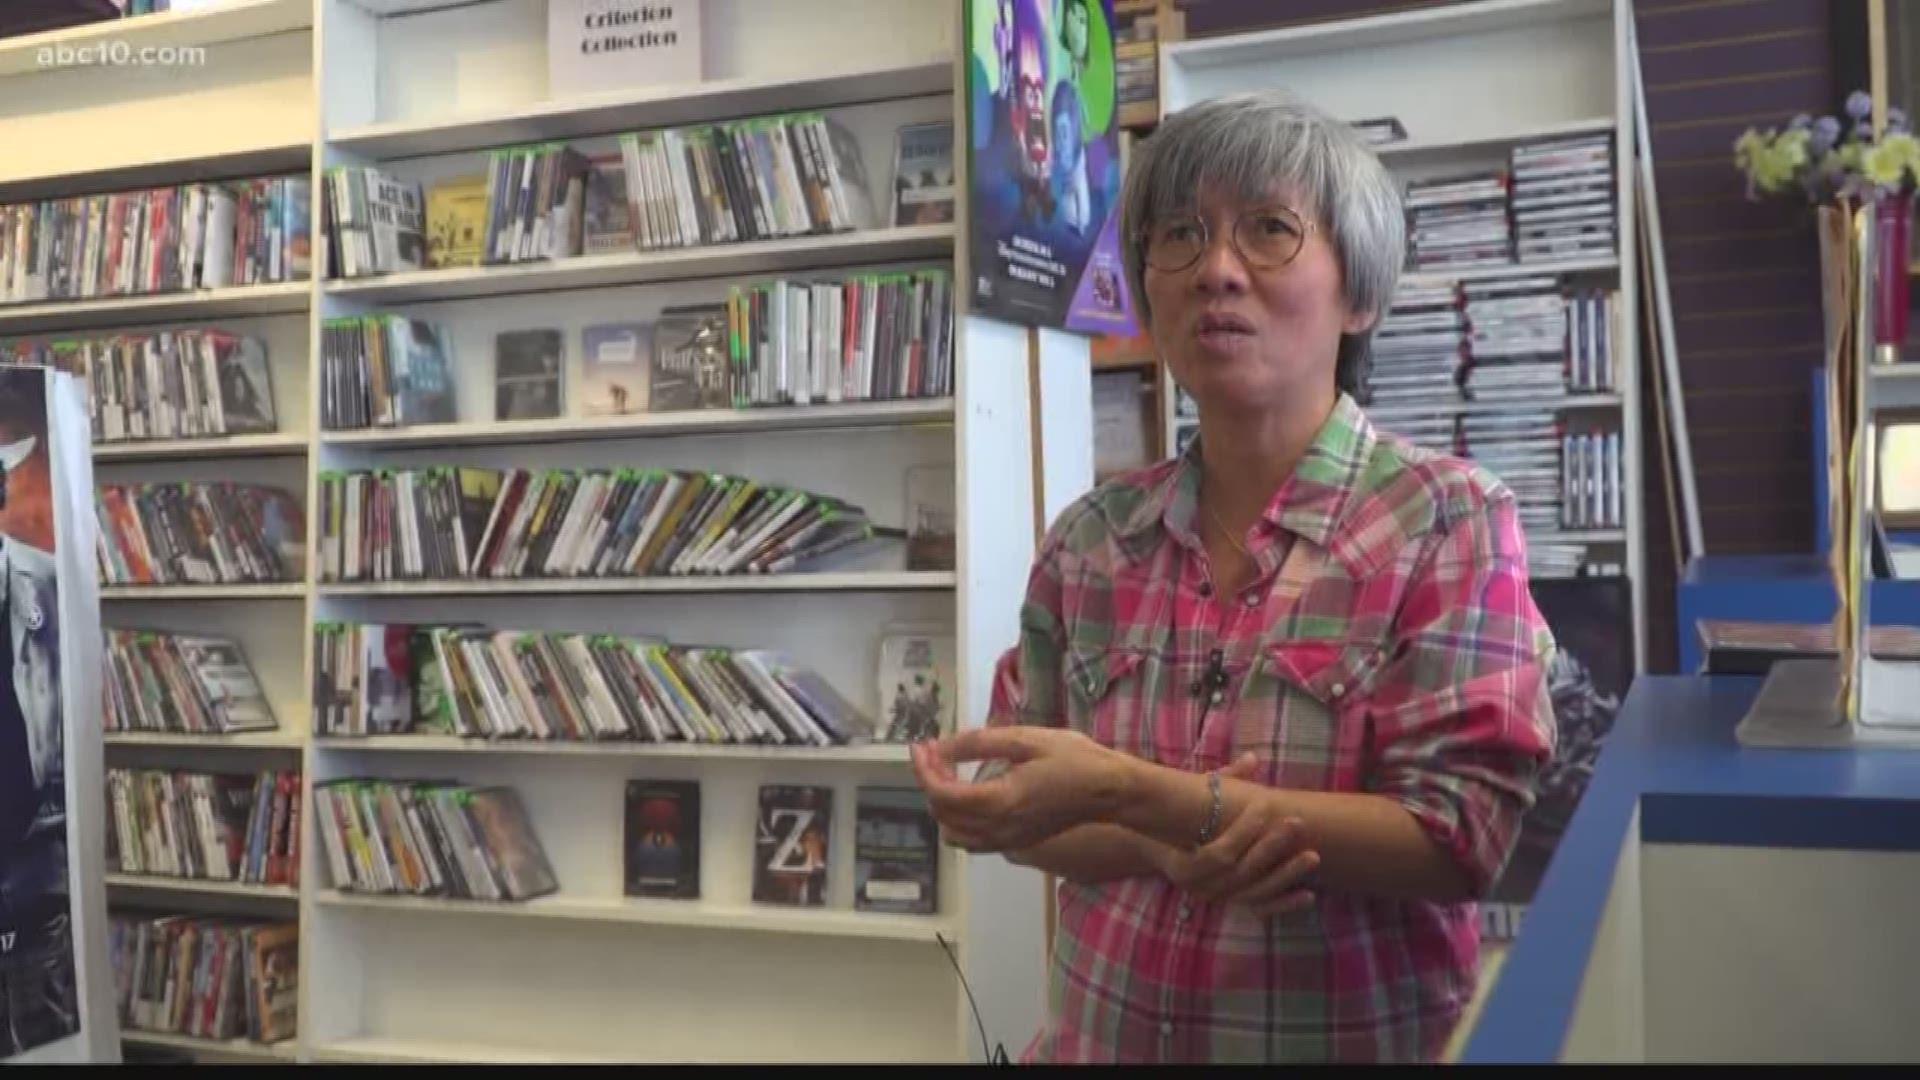 After 24 years in business a popular video rental store is pressing the stop button for the last time. Awesome Video in Land Park is closing its doors.